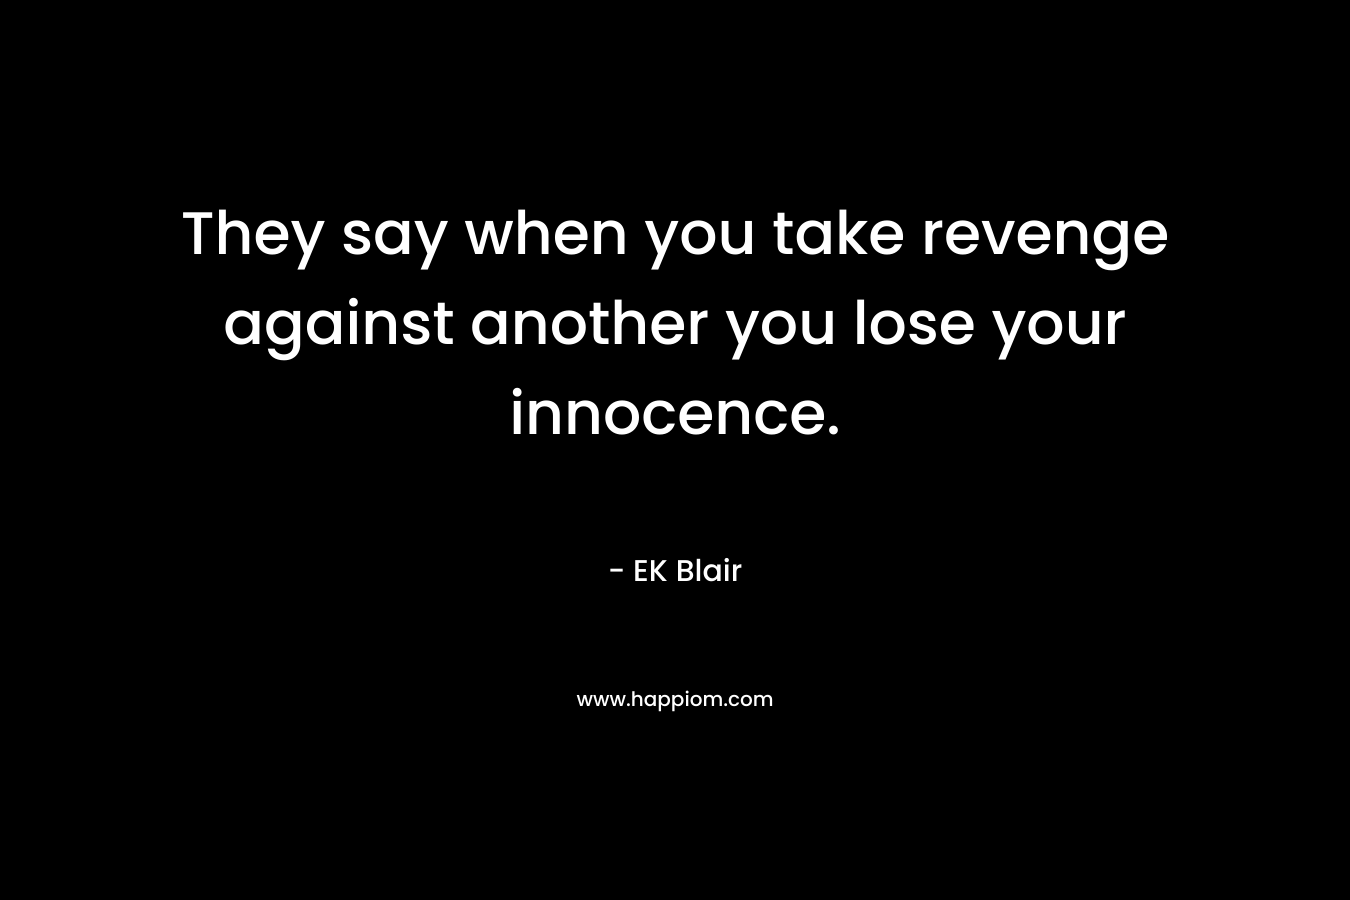 They say when you take revenge against another you lose your innocence. – EK Blair